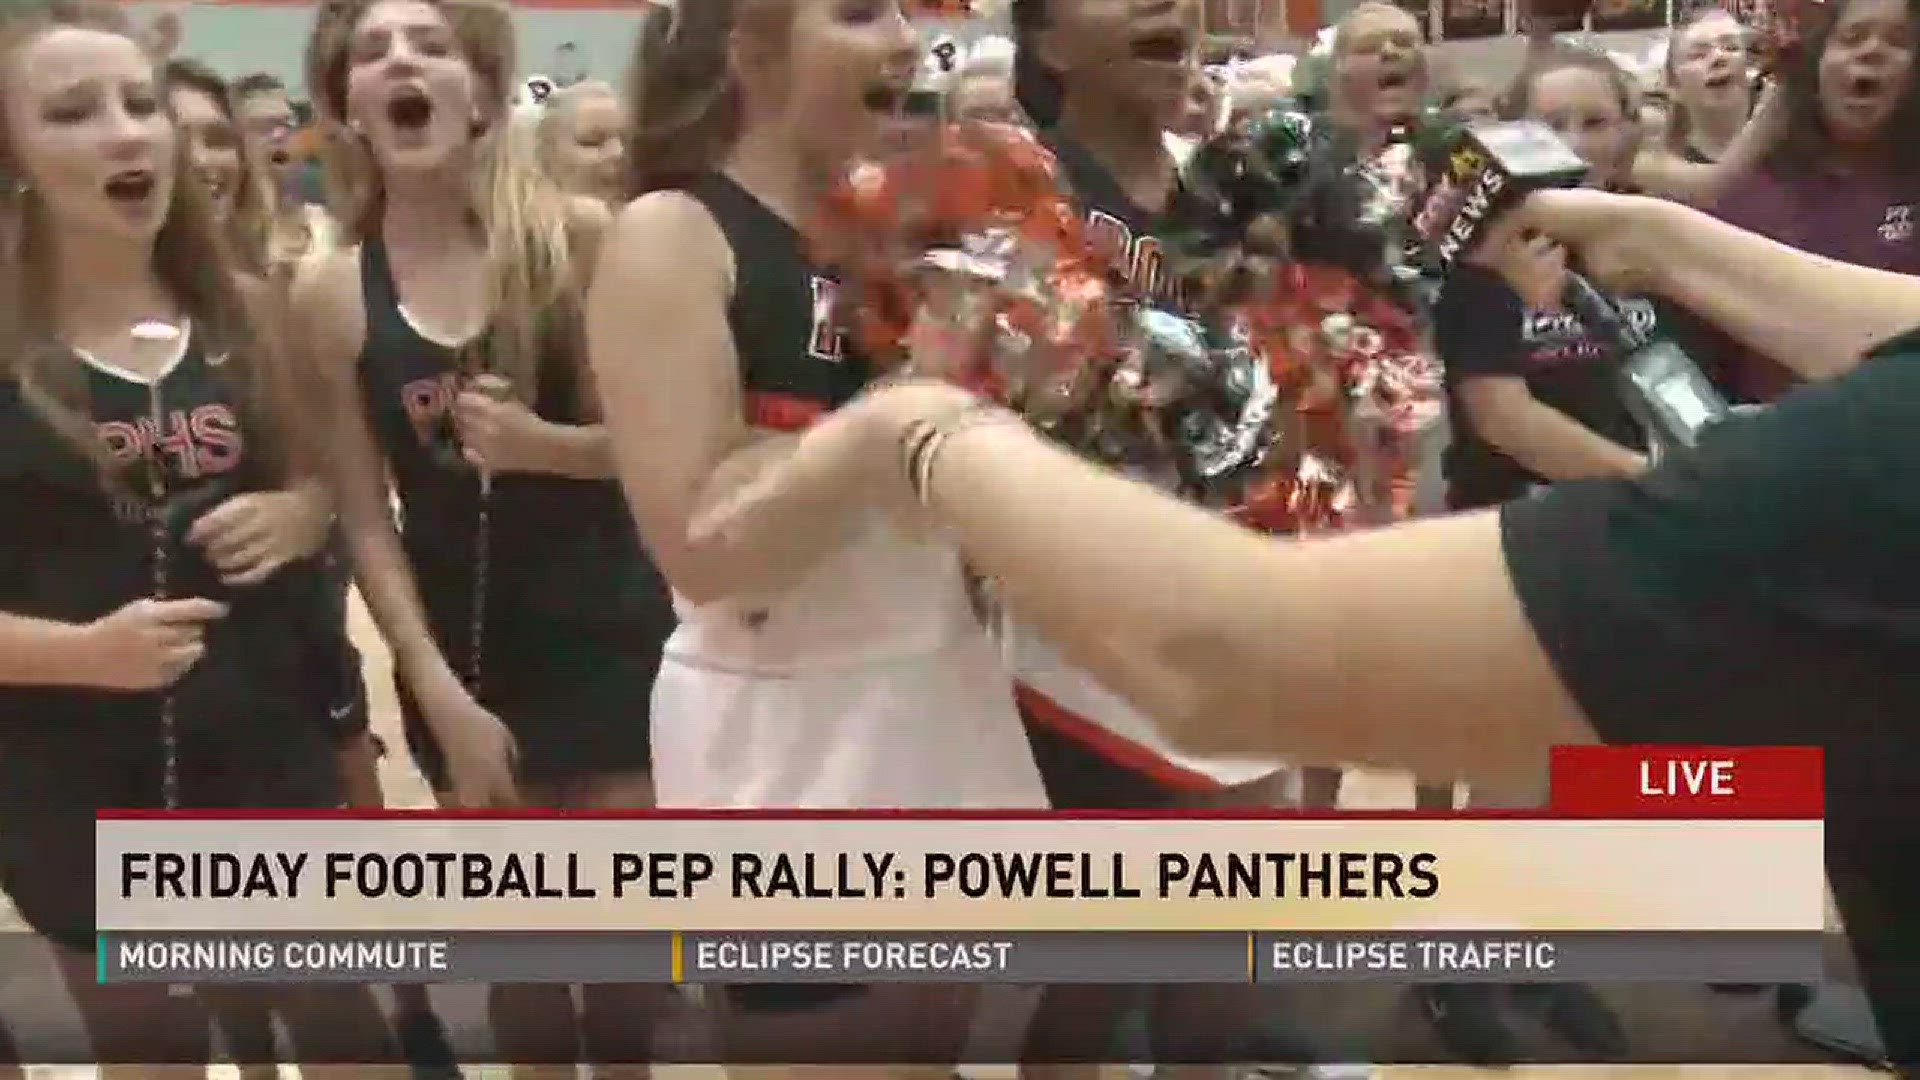 Talk about loud and proud school spirit! Rebecca Sweet hangs out with the band and students at Powell High School.